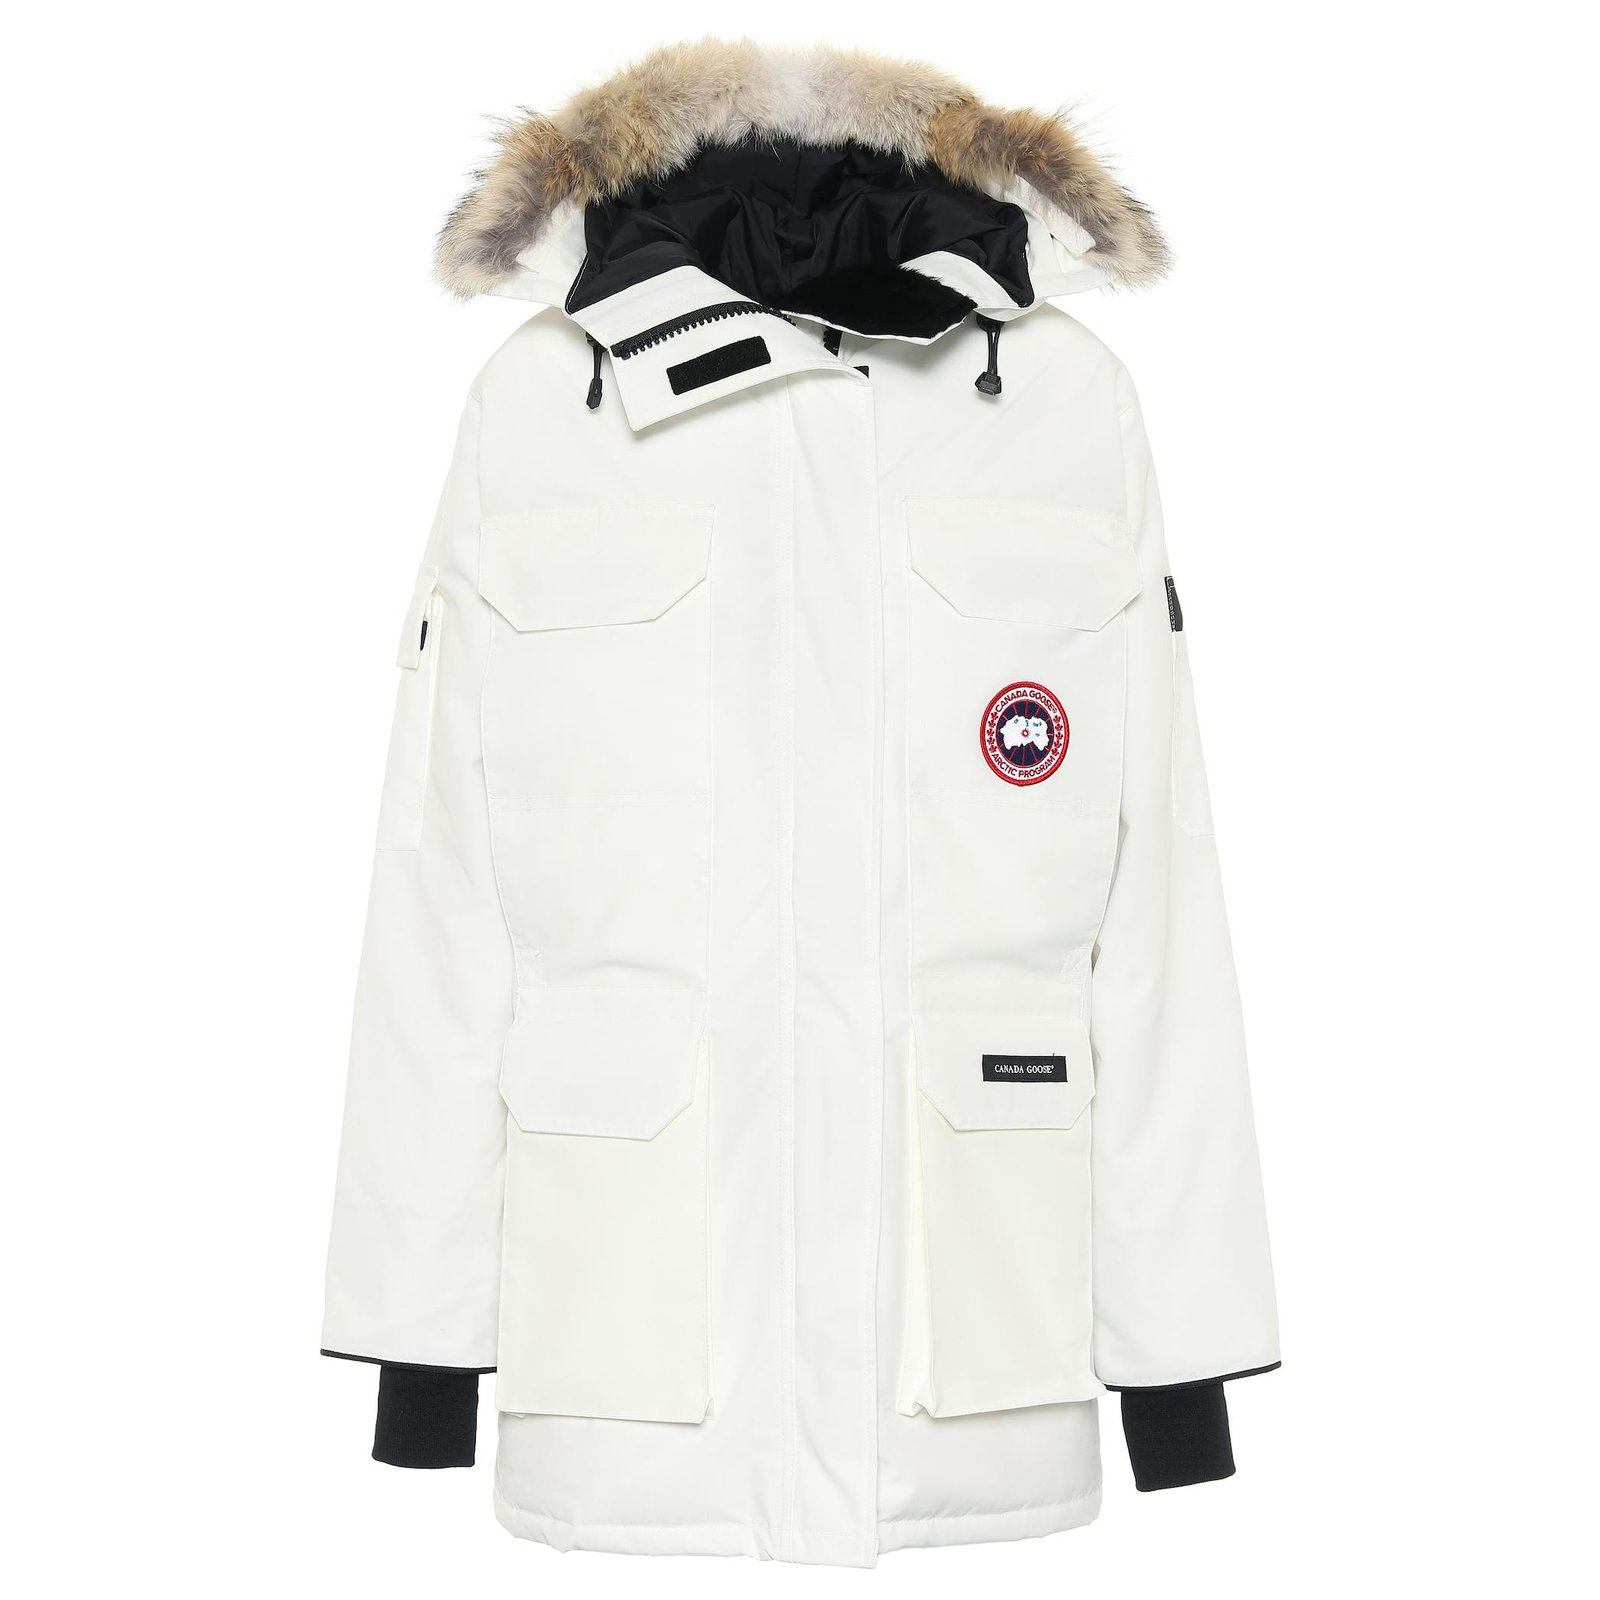 Canada Goose CANADAGOOSE EXPEDITION PARKA JACKET WHITE Synthetic ref ...